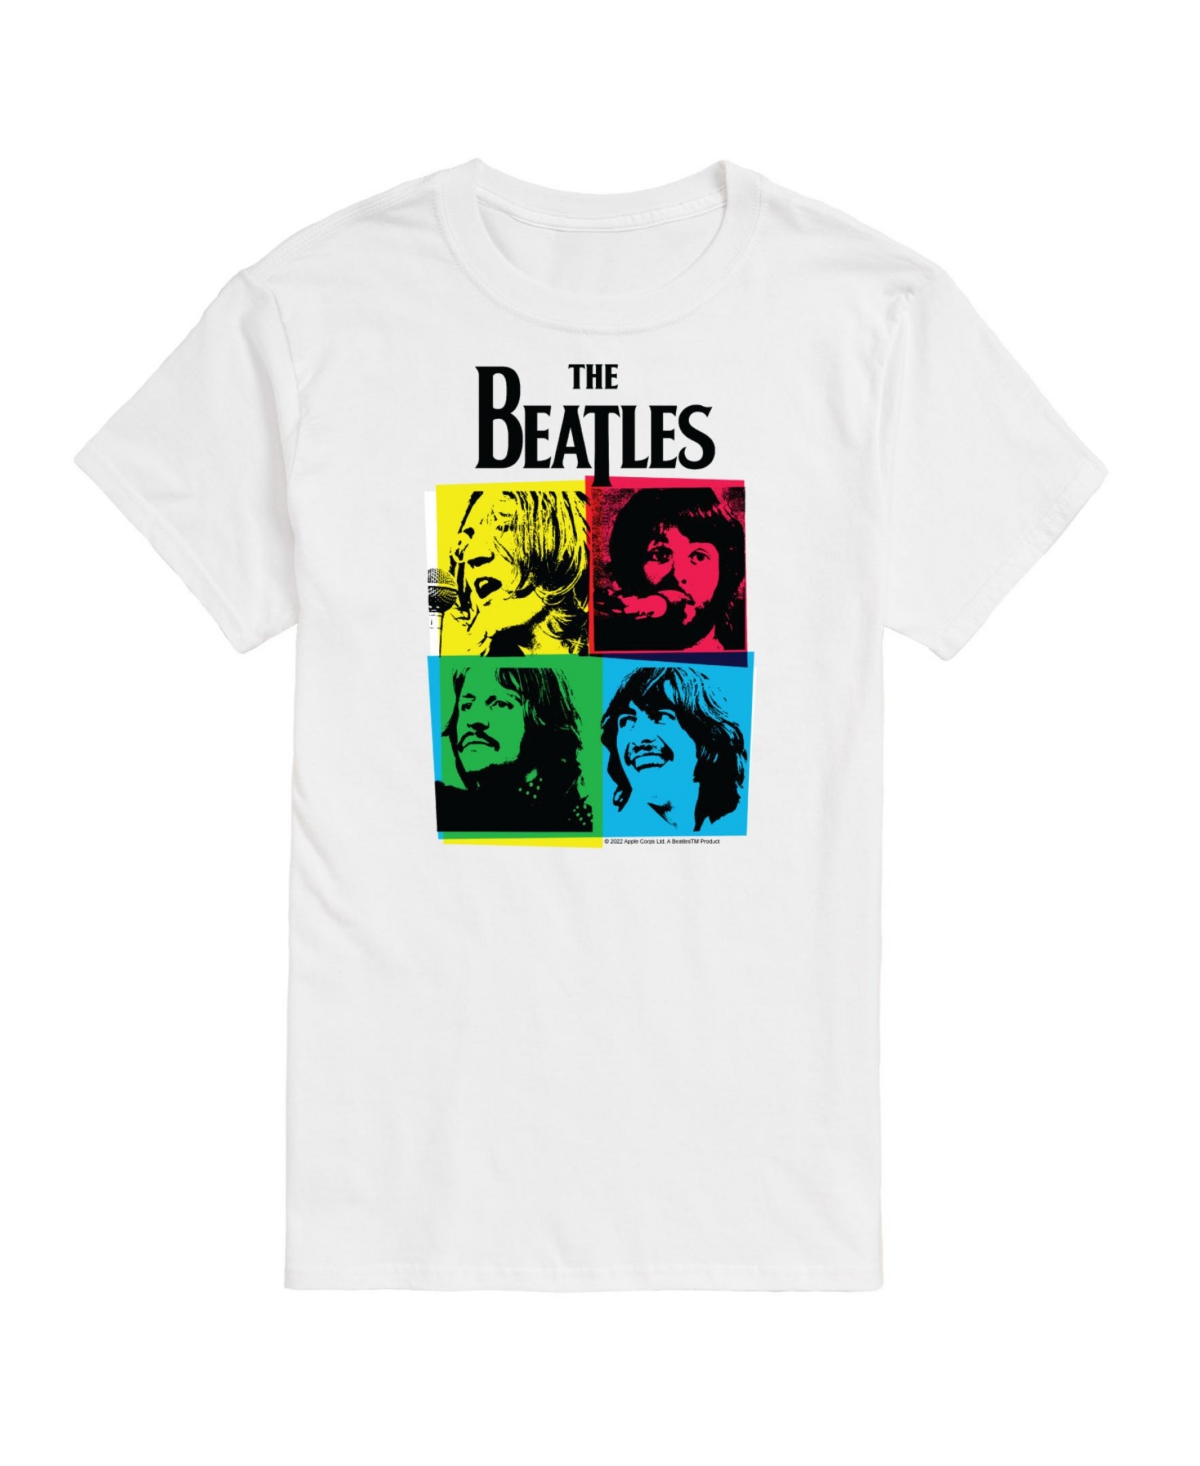 Hybrid Apparel The Beatles Group Colorful Short Sleeve Tee - White